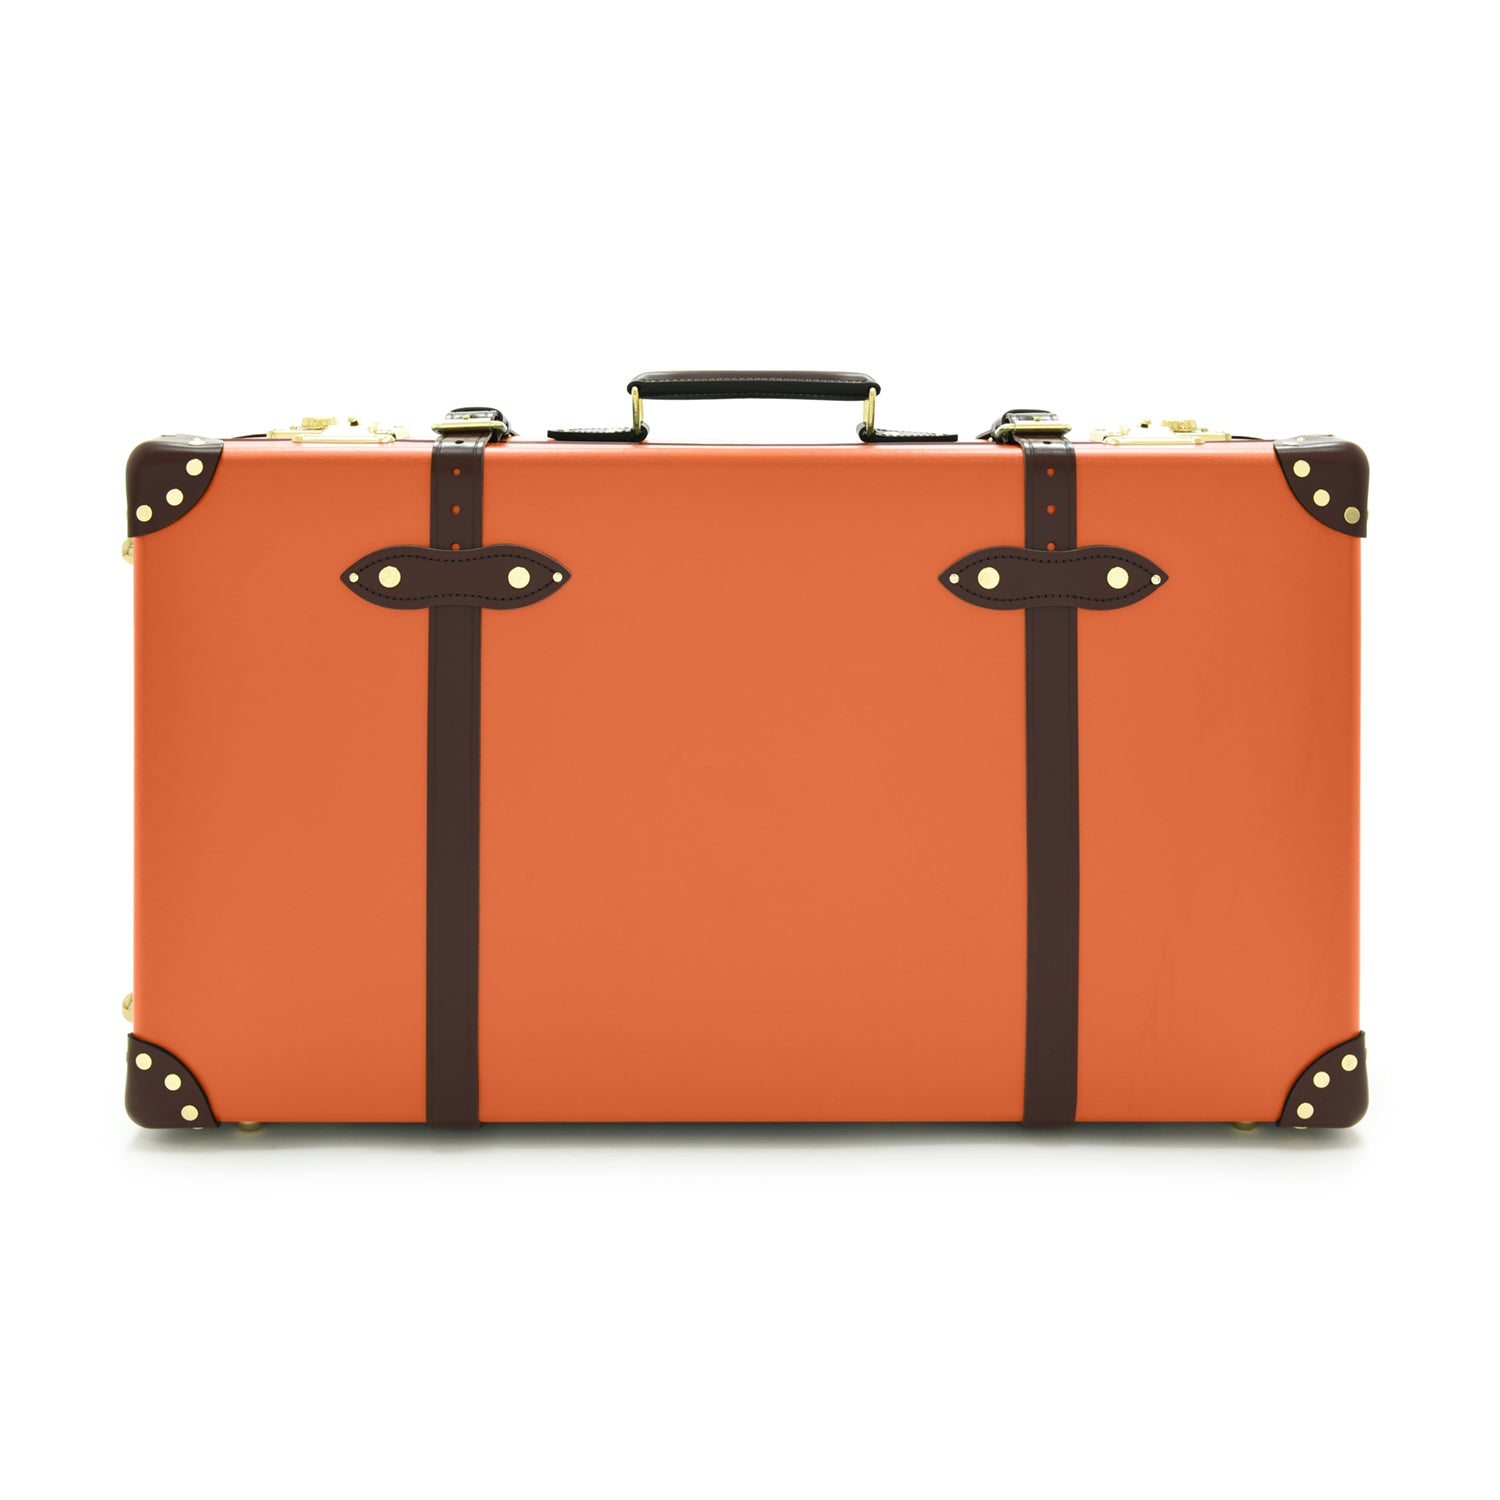 Centenary · Large Suitcase | Marmalade/Brown - GLOBE-TROTTER